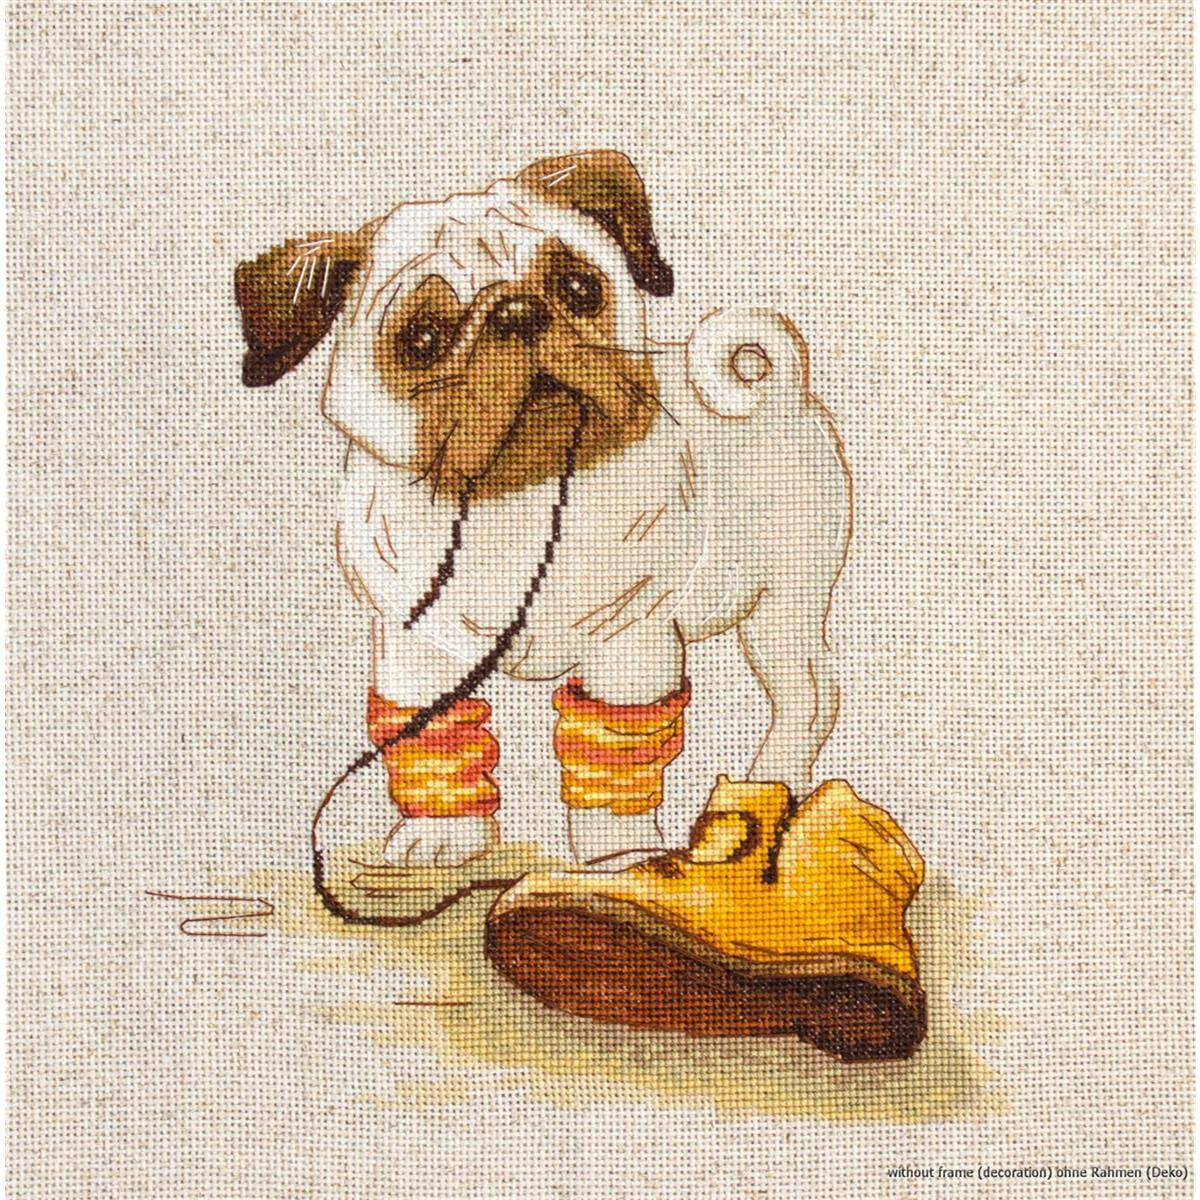 Luca-S counted Cross Stitch kit "Pug",...